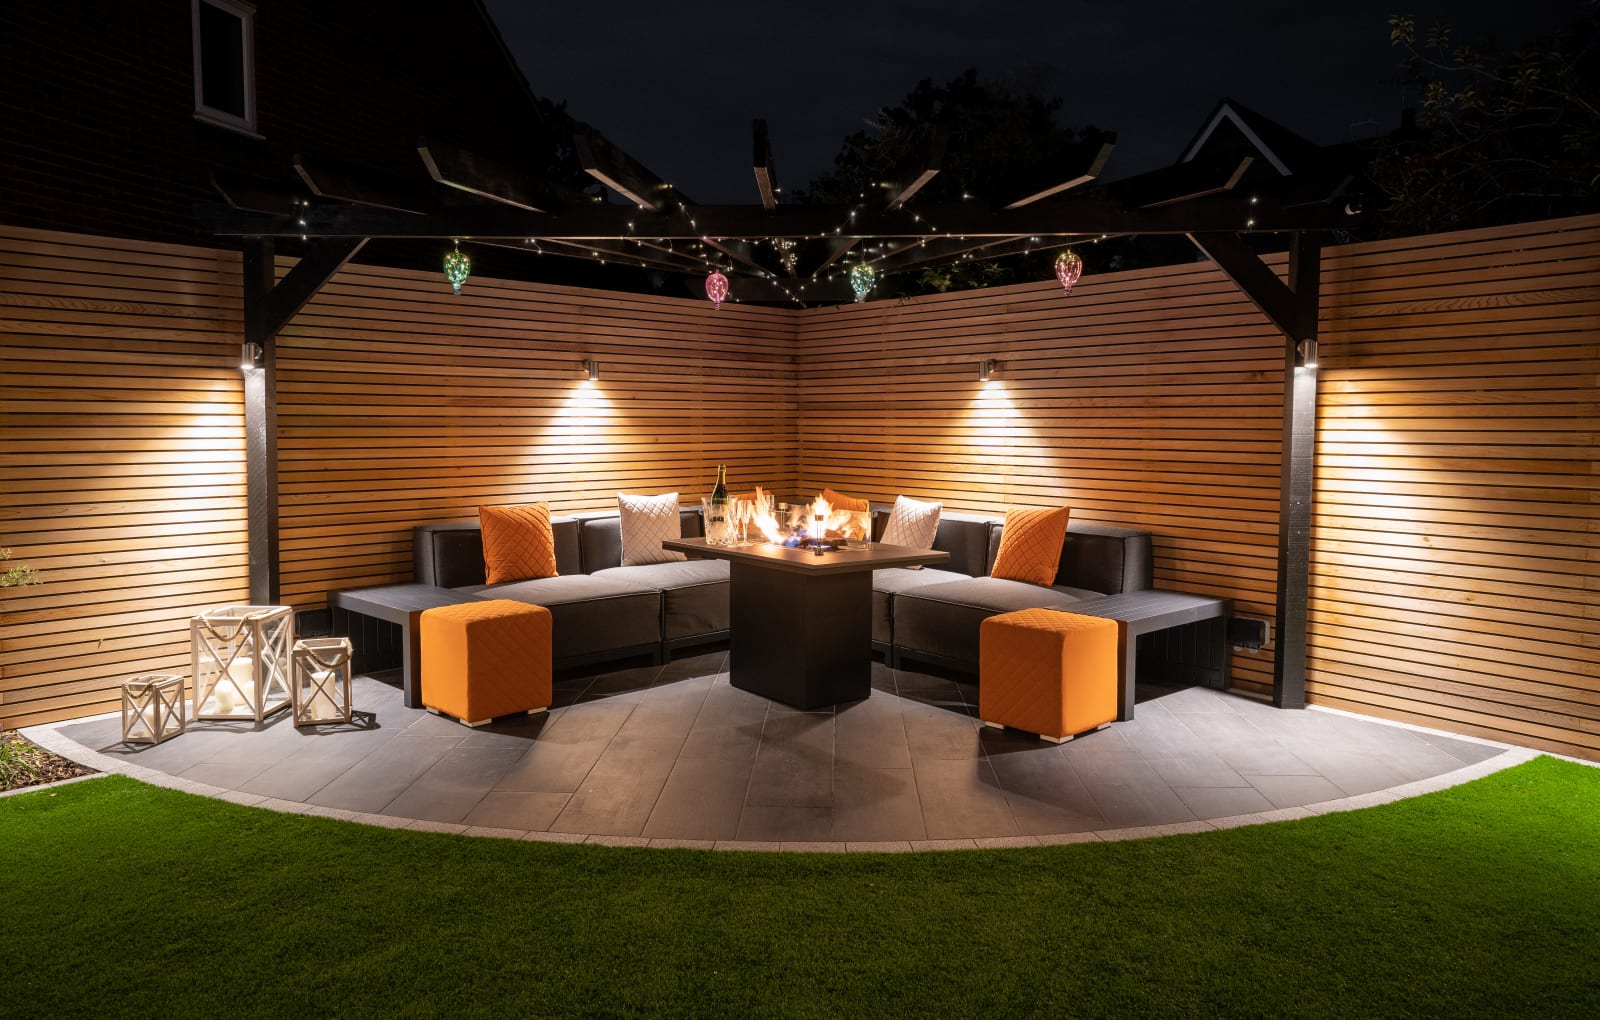 A low maintenance garden with an outdoor kitchen and seating area